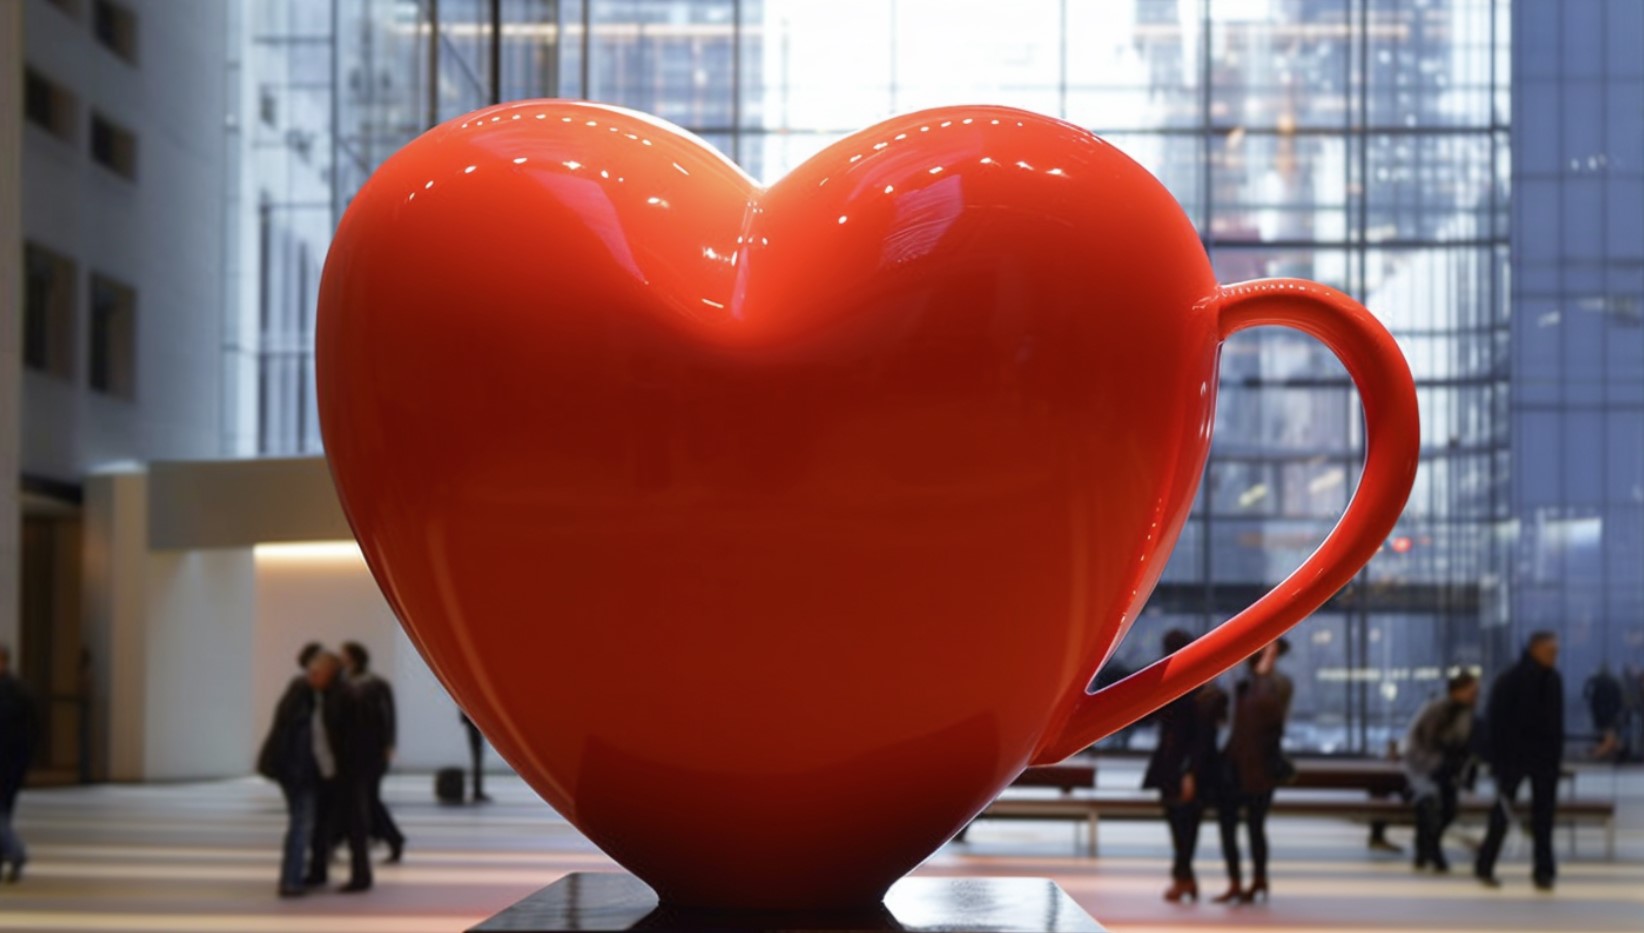 Overconfident Goldman Sachs partner begins “adorable love story” at the company